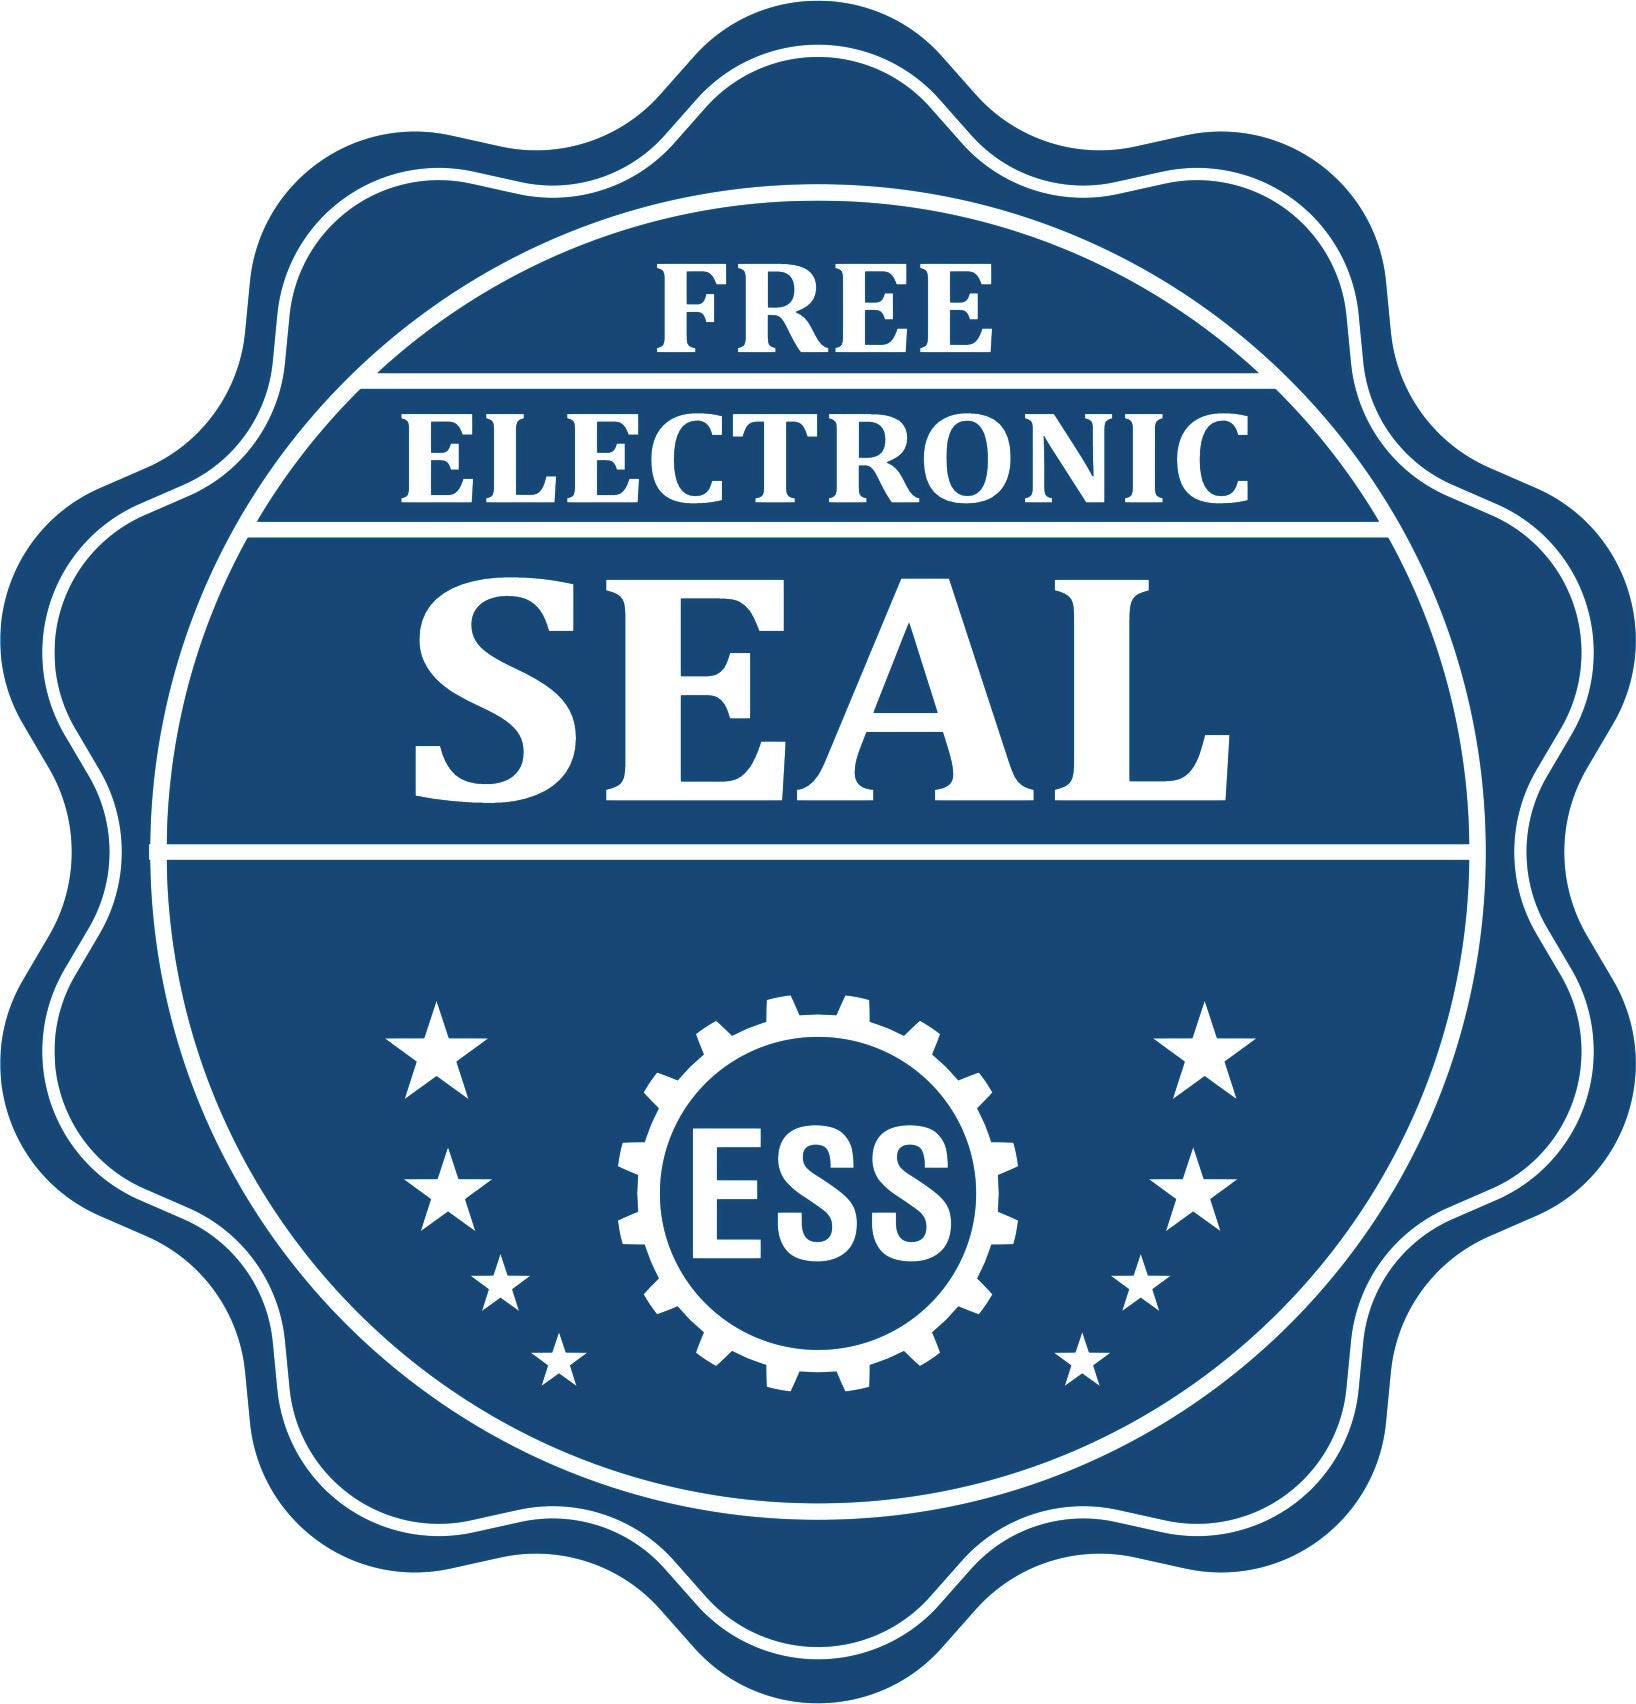 A badge showing a free electronic seal for the Oregon Engineer Desk Seal with stars and the ESS gear on the emblem.